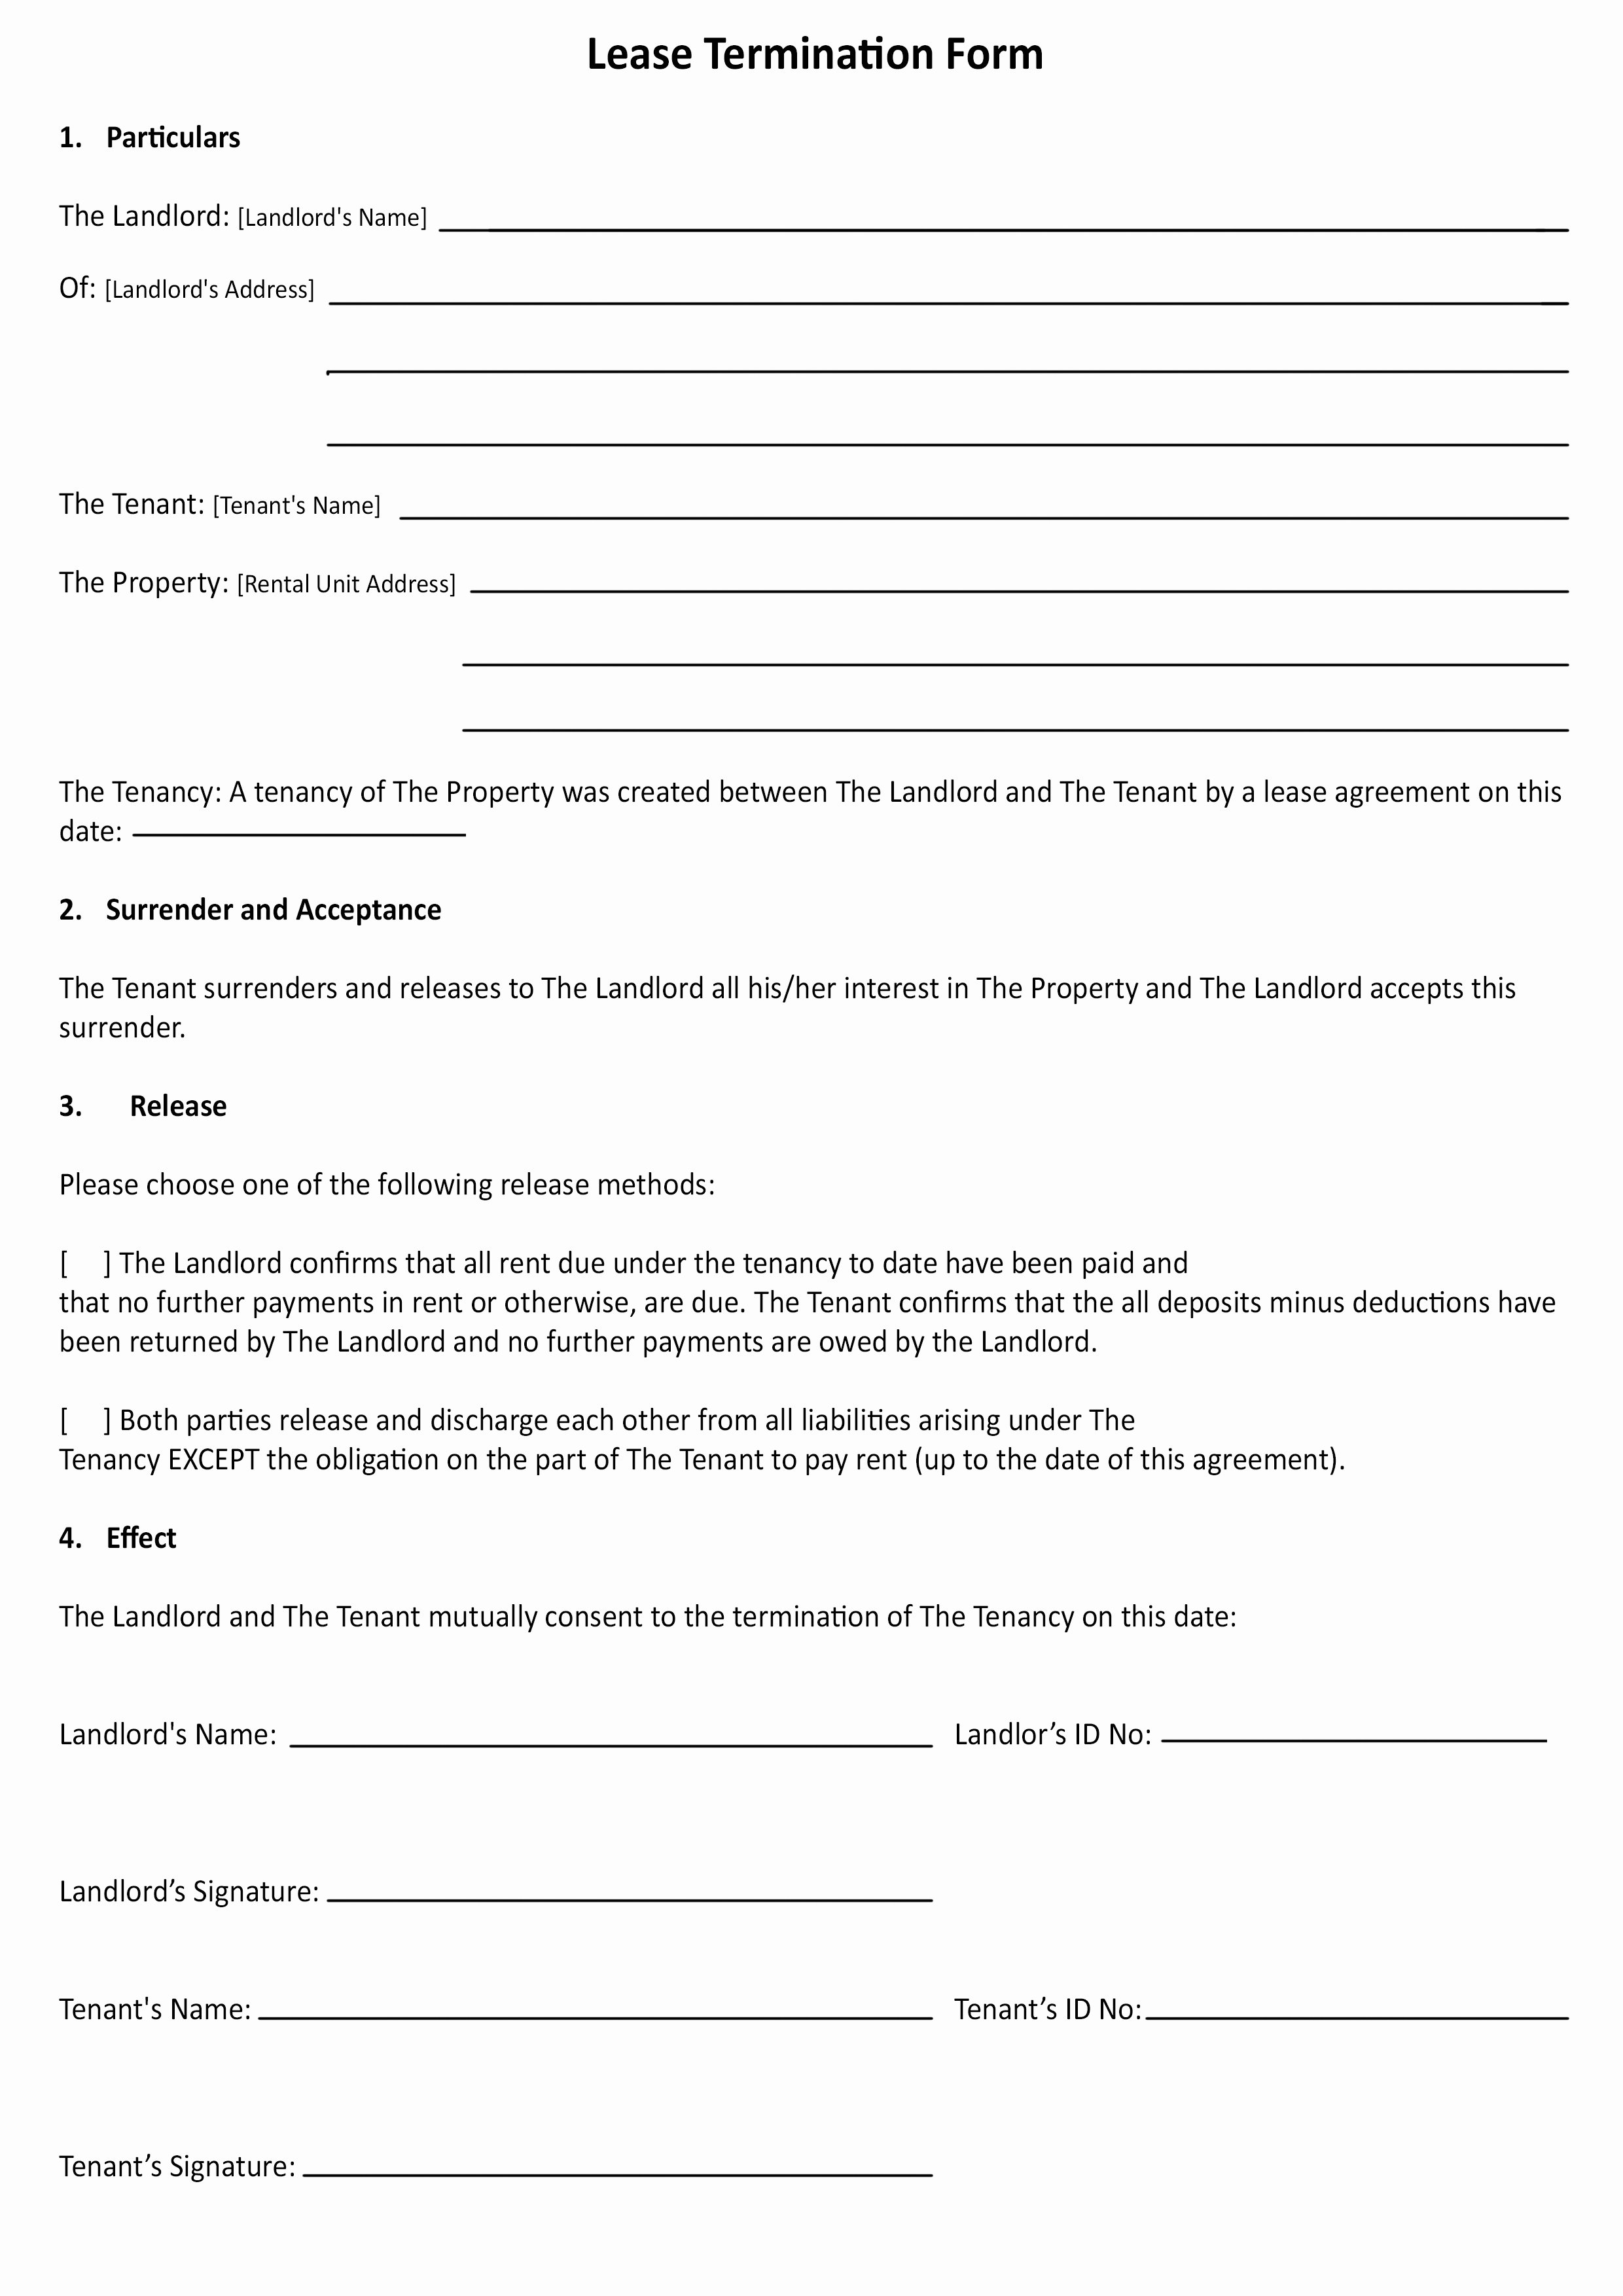 Lease Termination Agreement Template Awesome form Lease Termination form